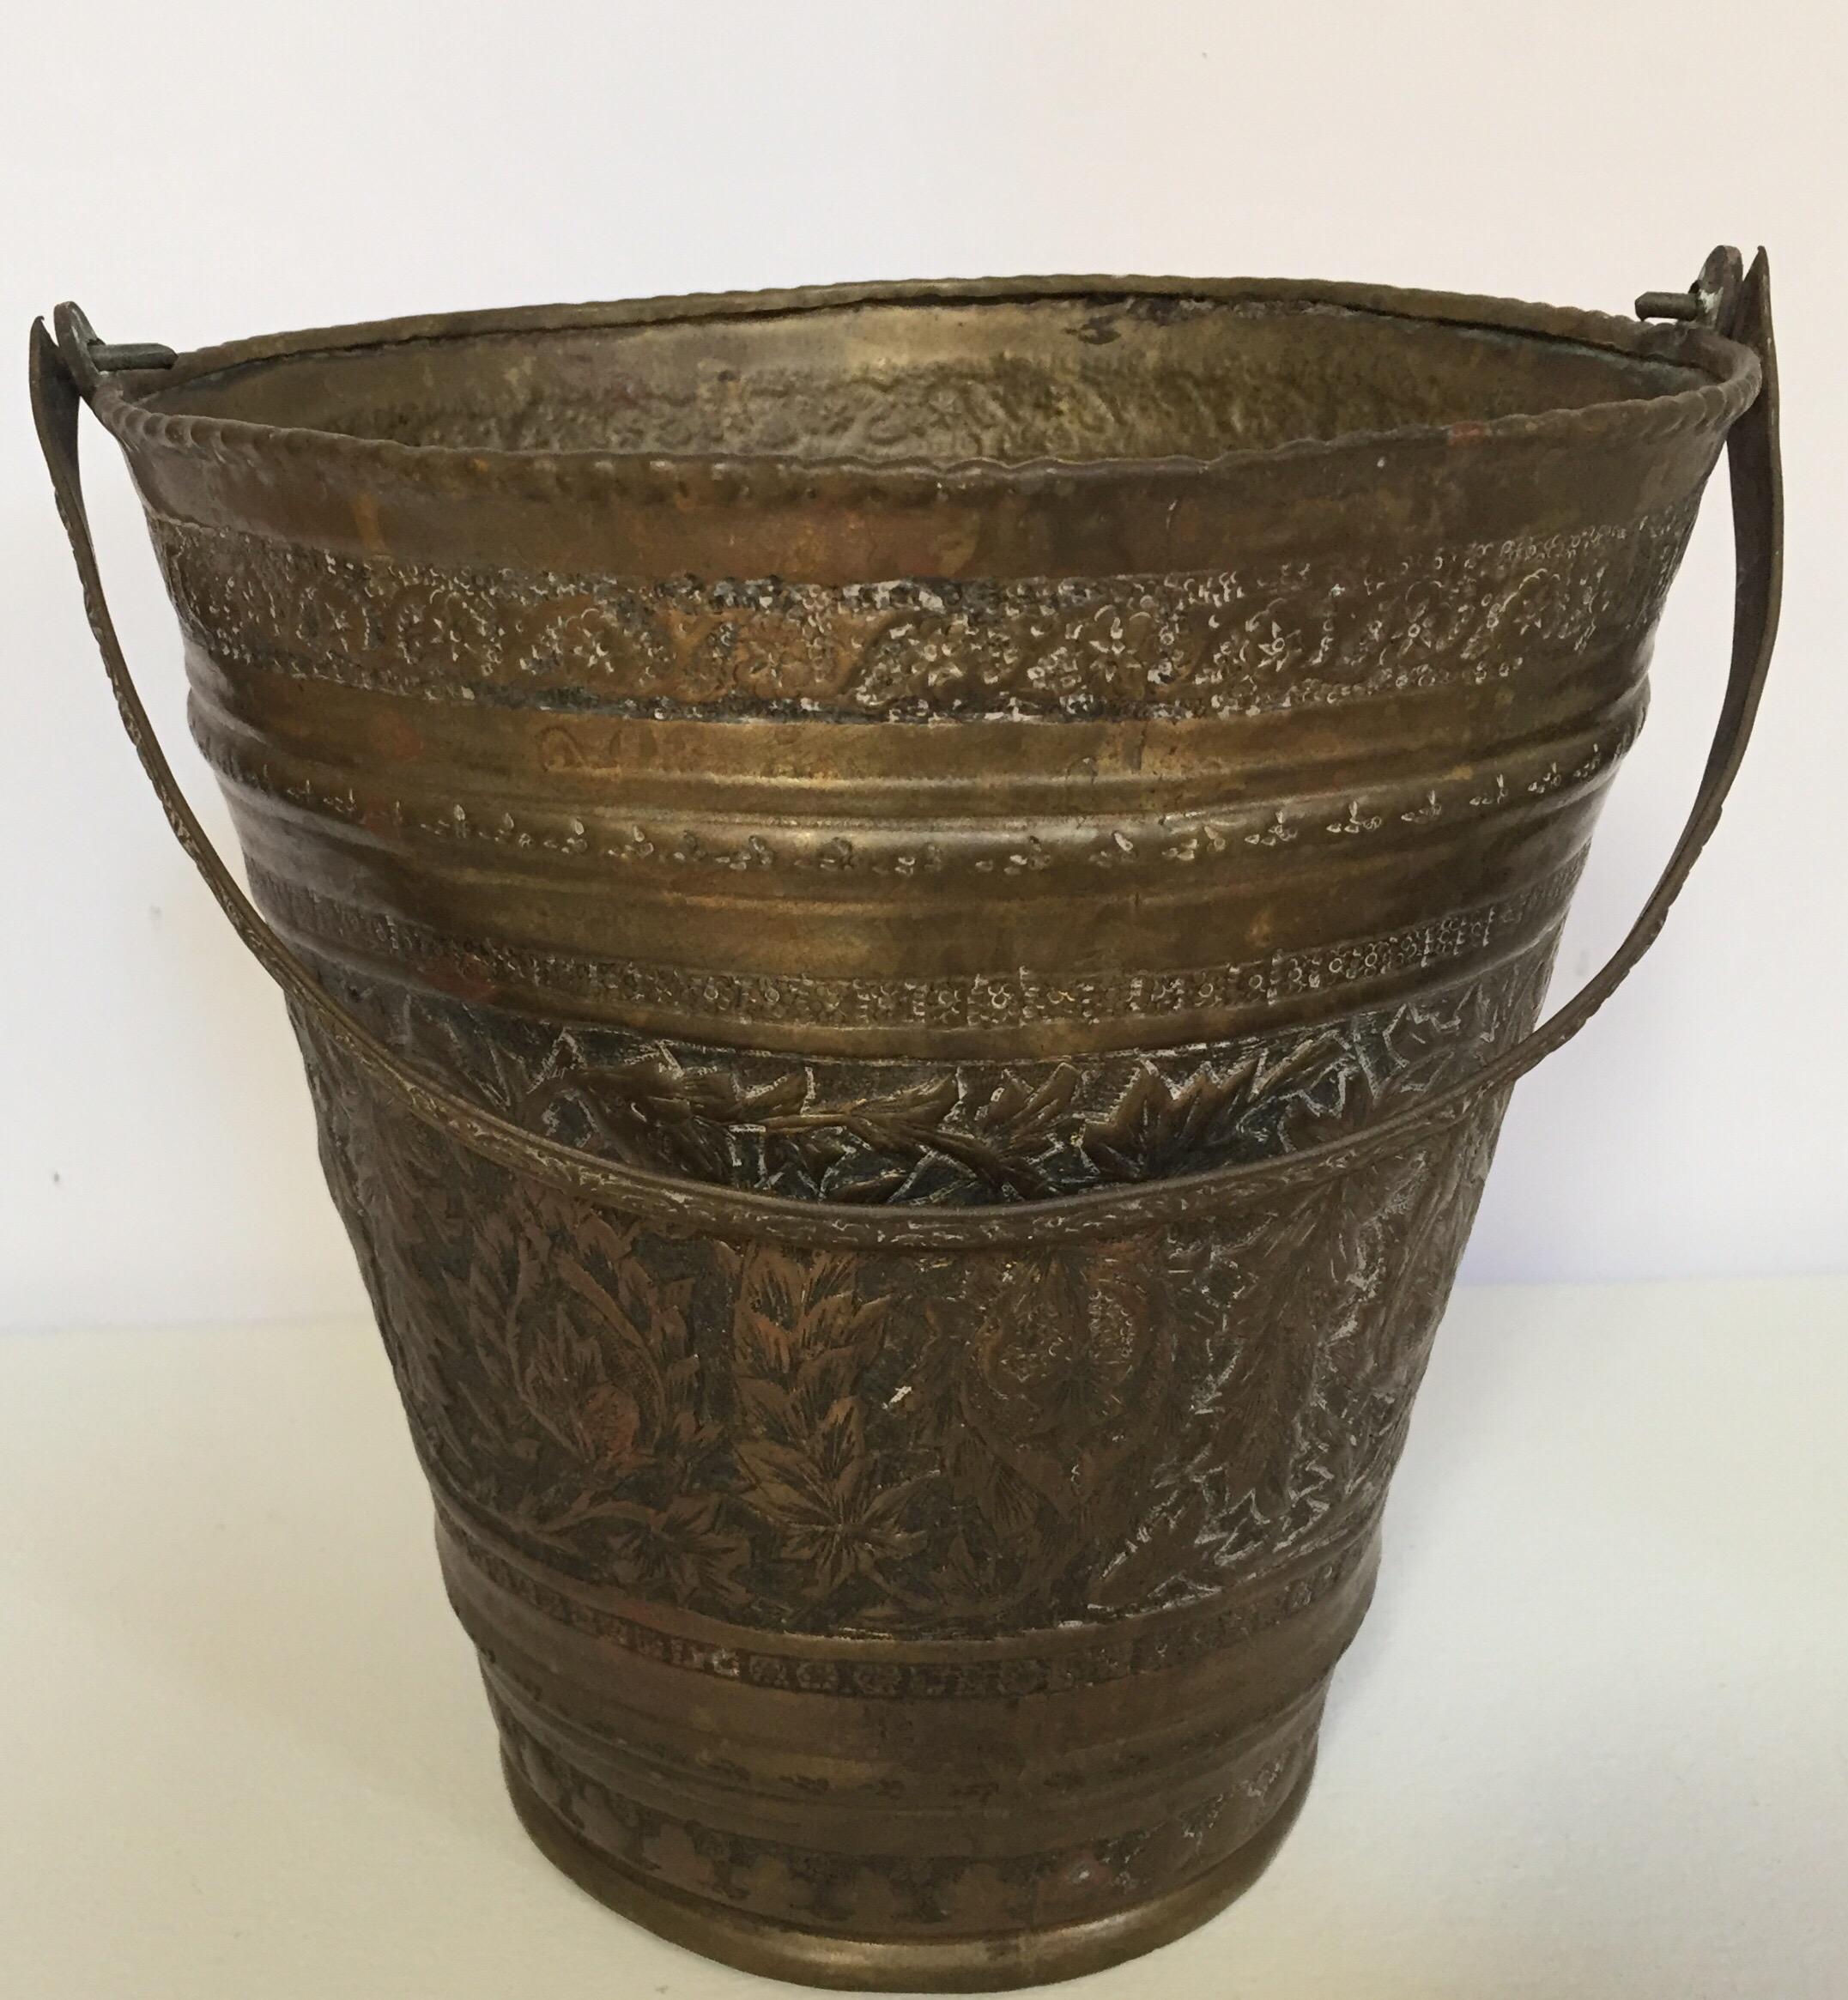 19th century Anglo Raj Mughal bronzed metal copper vessel water or milk bucket.
Originally used to carry water, this hand-hammered metal vessel from India has authentic texture, wonderful patina, and great form and character.
Great patina on